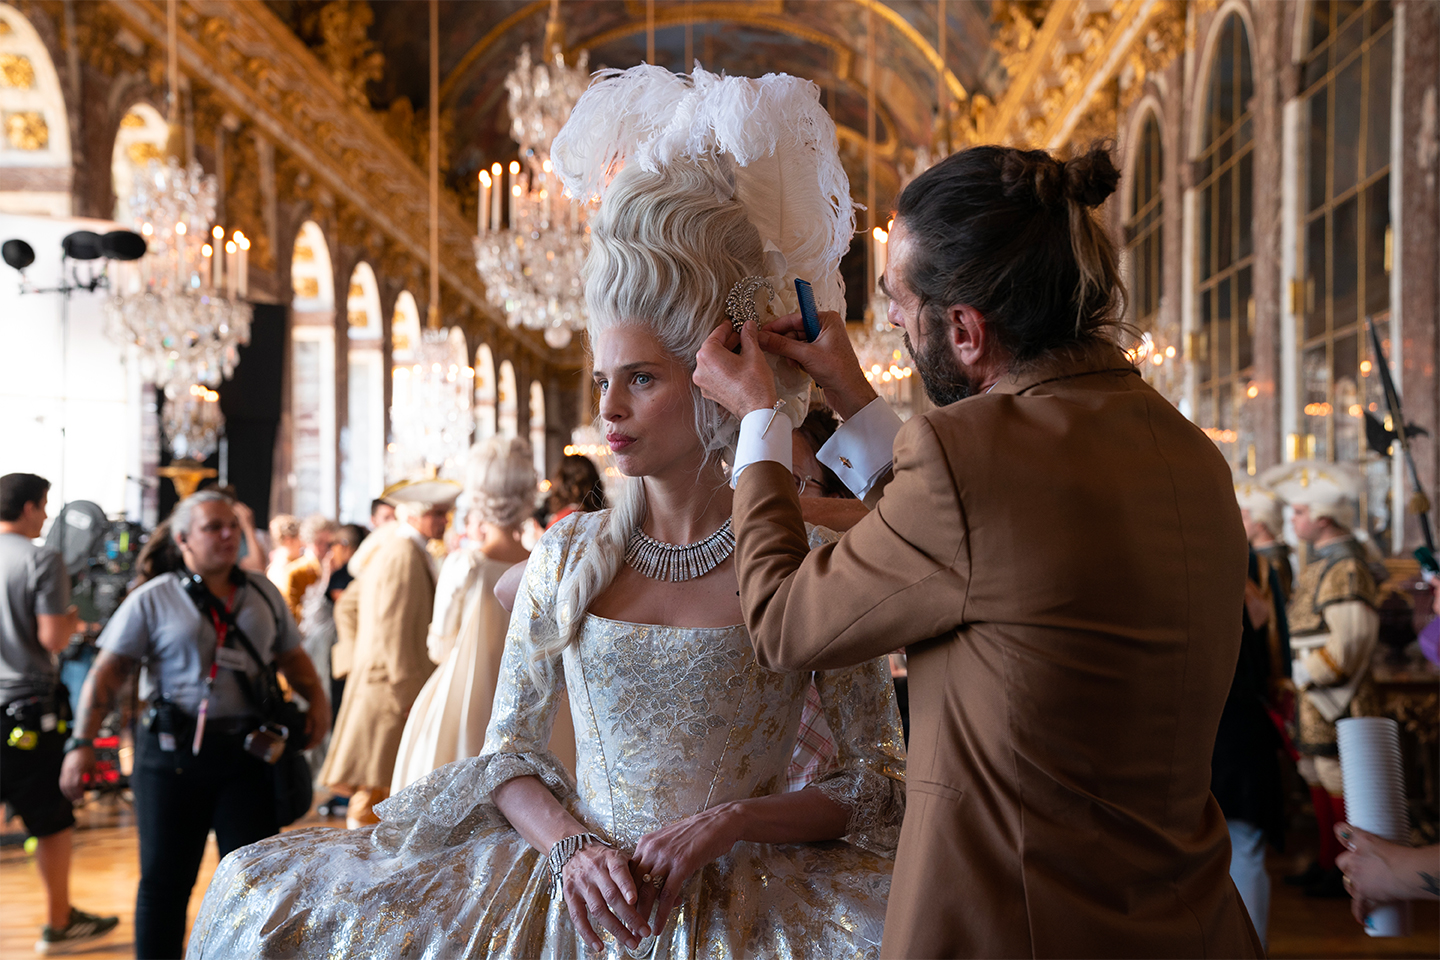 A behind-the-scenes moment of Maïwenn's latest film, Jeanne Du Barry. Photo: Stephanie Branchu. Courtesy of Chanel